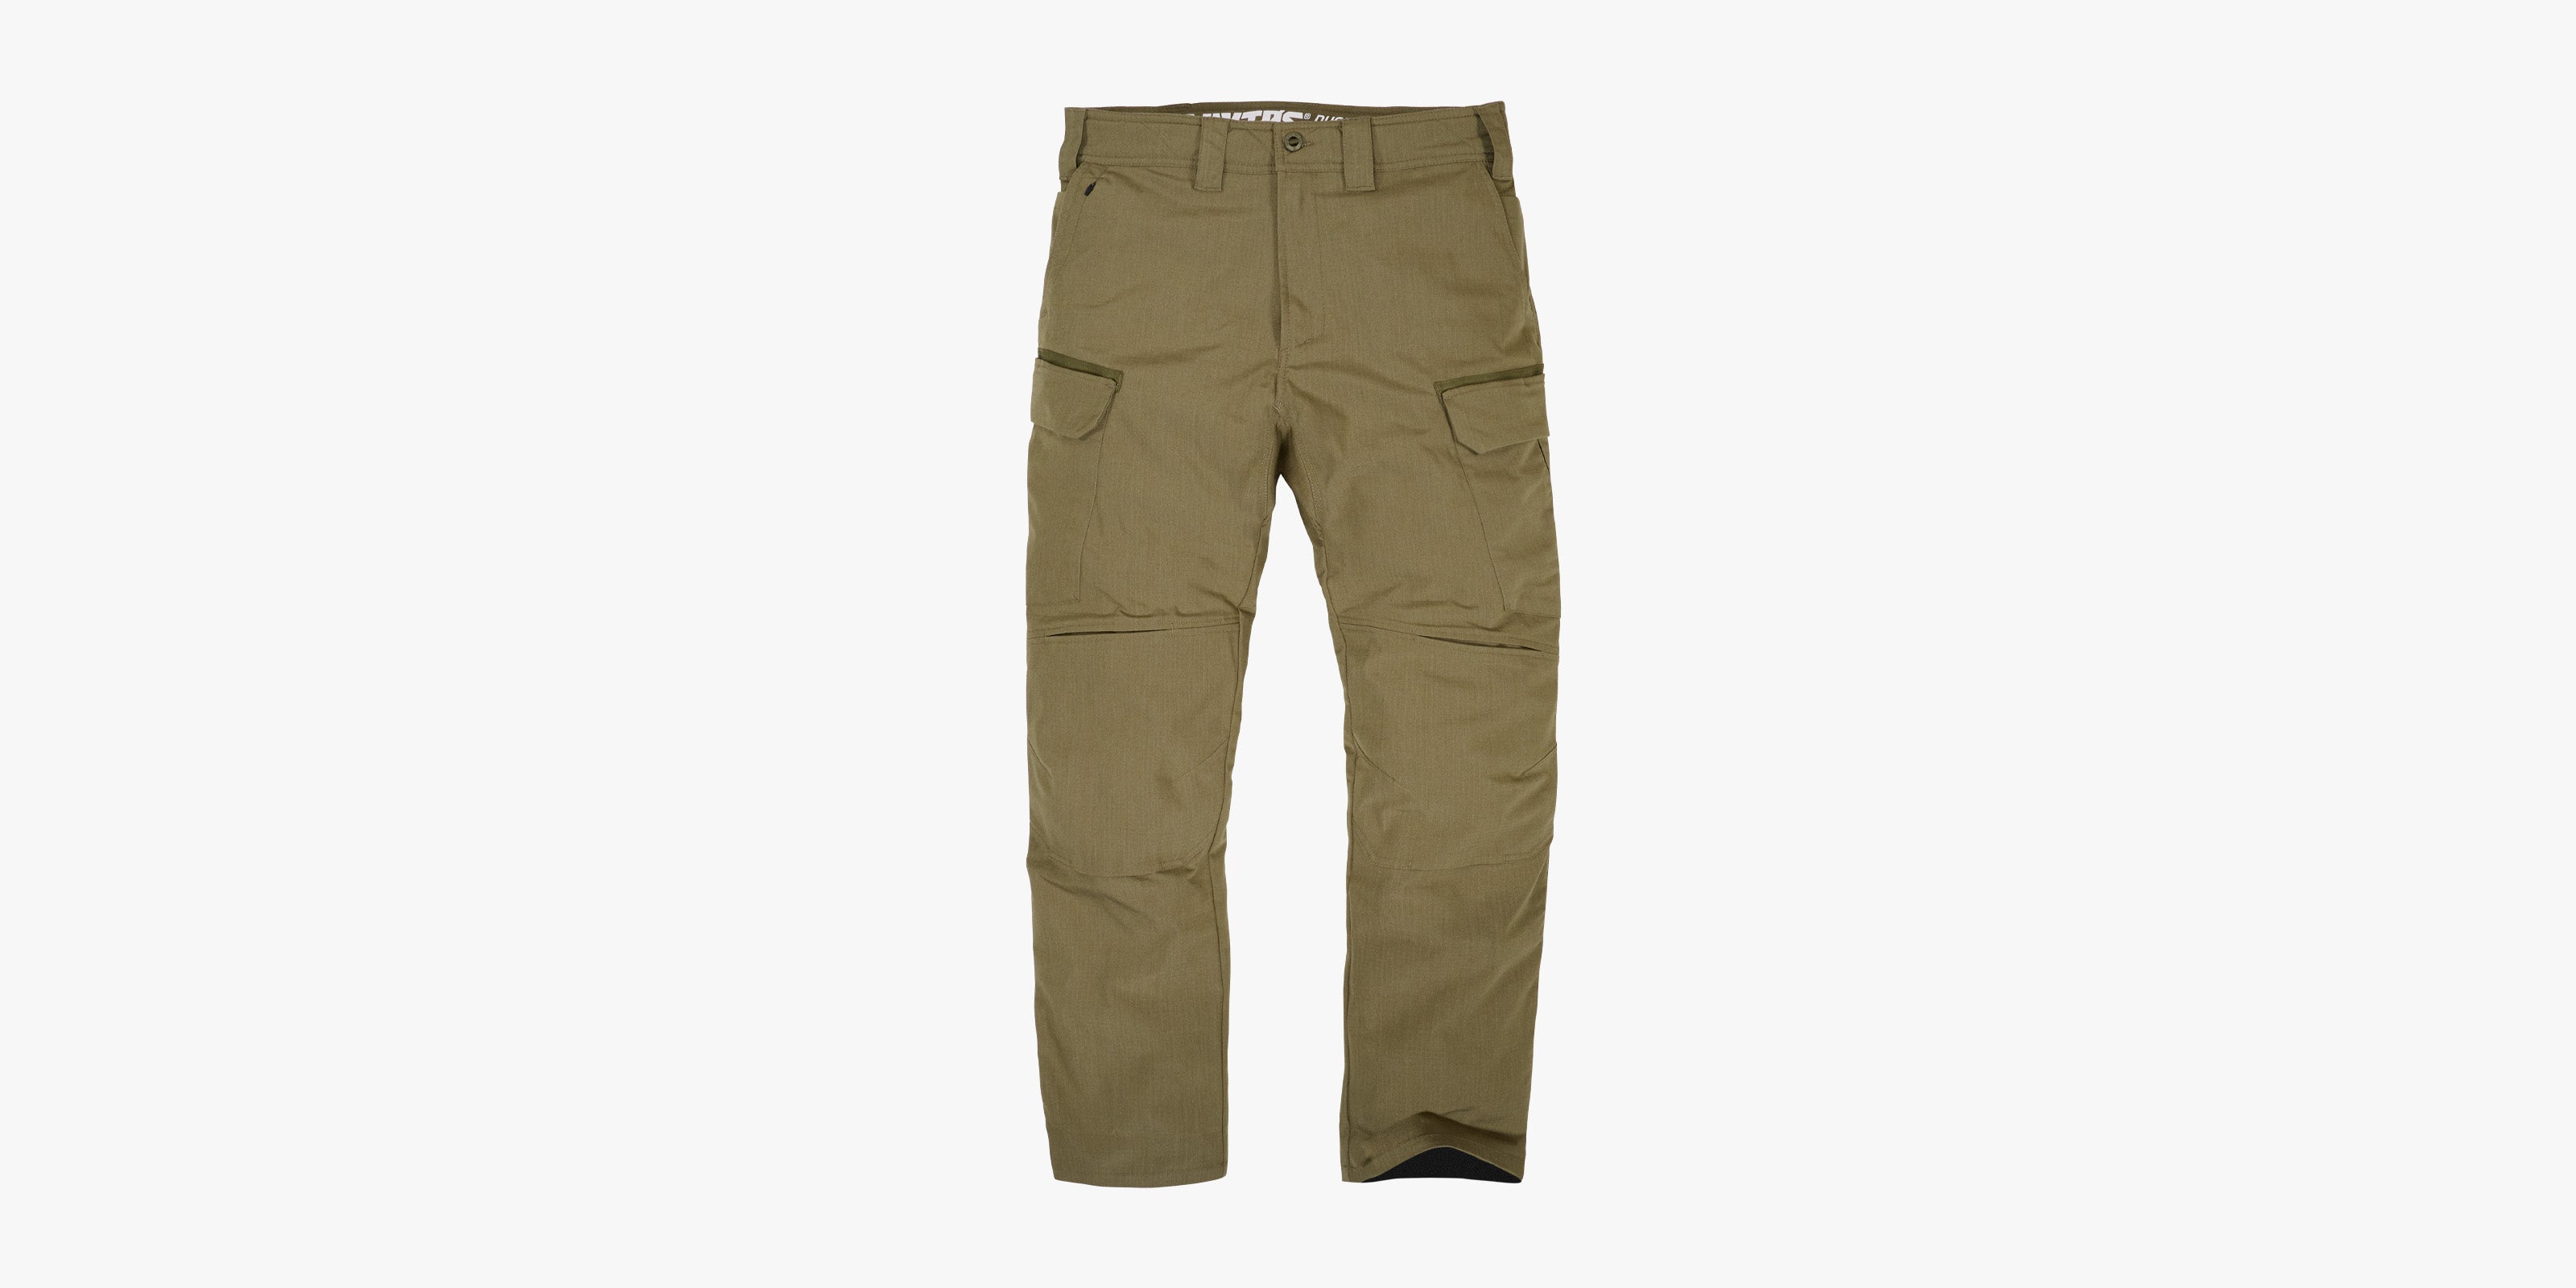 GRAPENT Trousers for Women High Waisted Outdoor Clothing Women